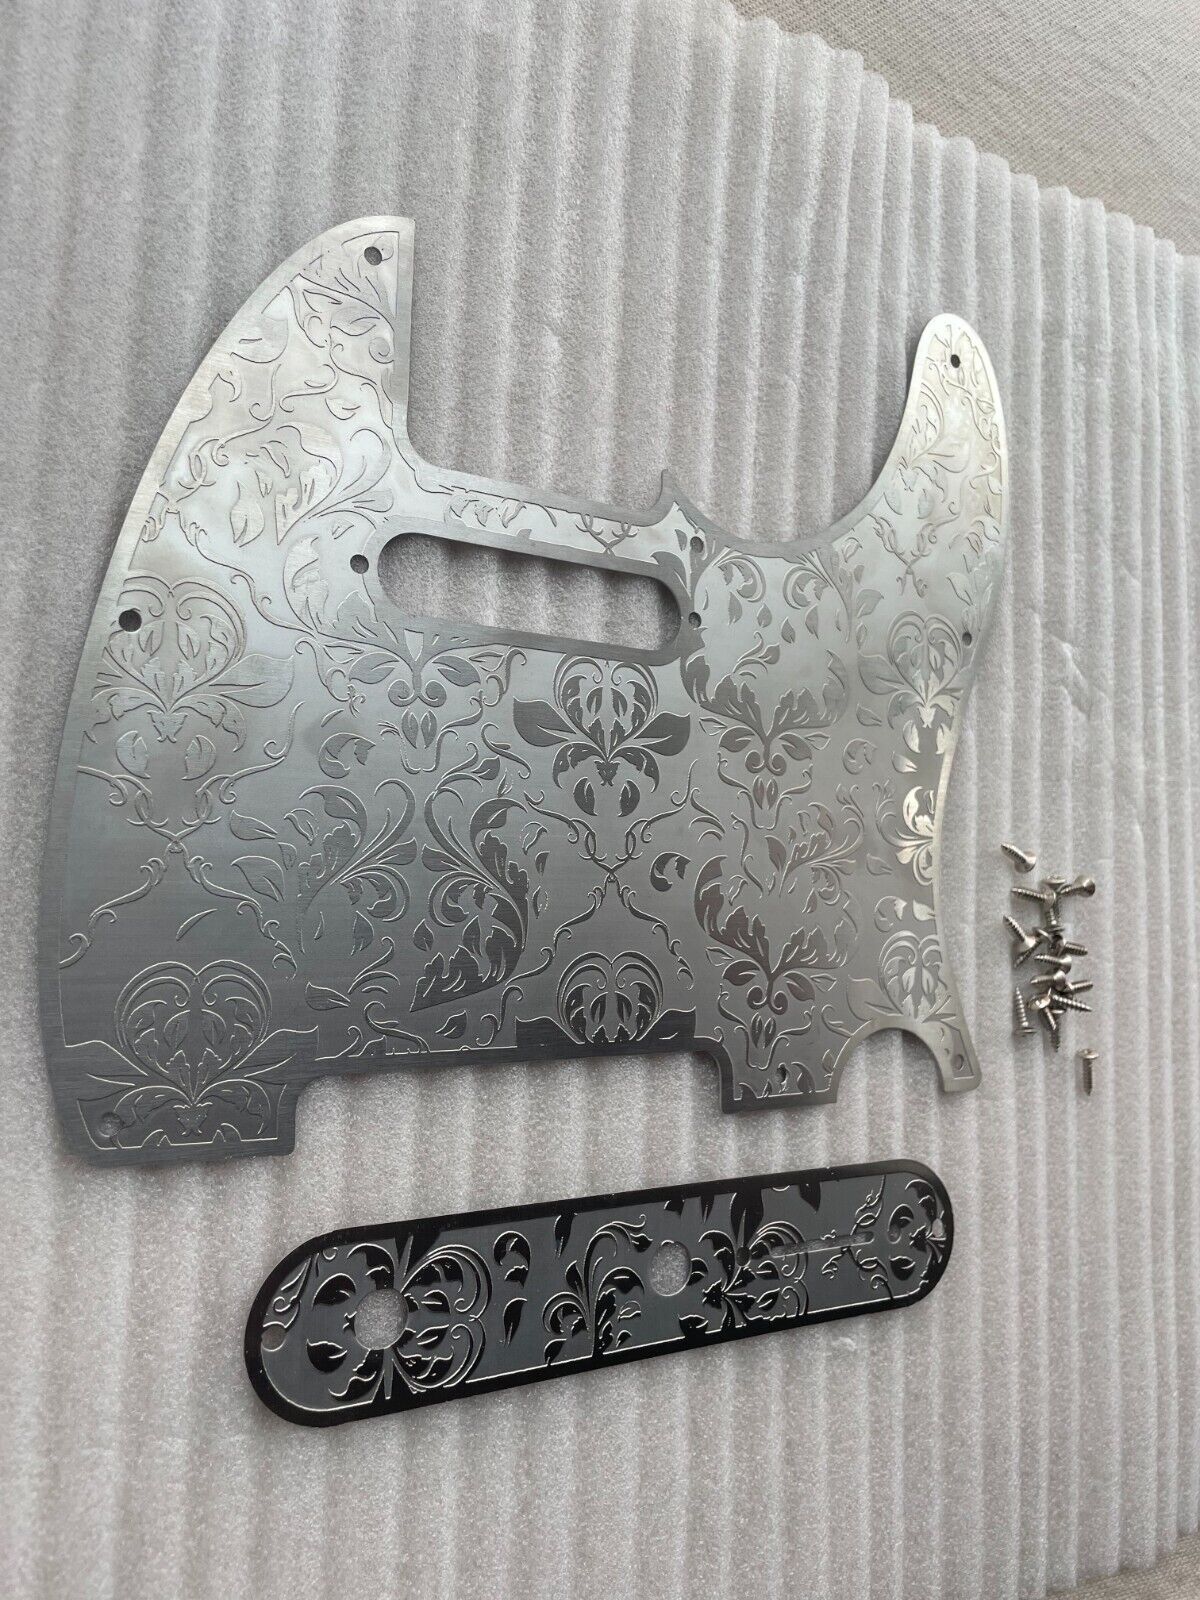 Engraved Stainless Steel Guitar Control Plate with Pickguard Fit Telecaster Tele